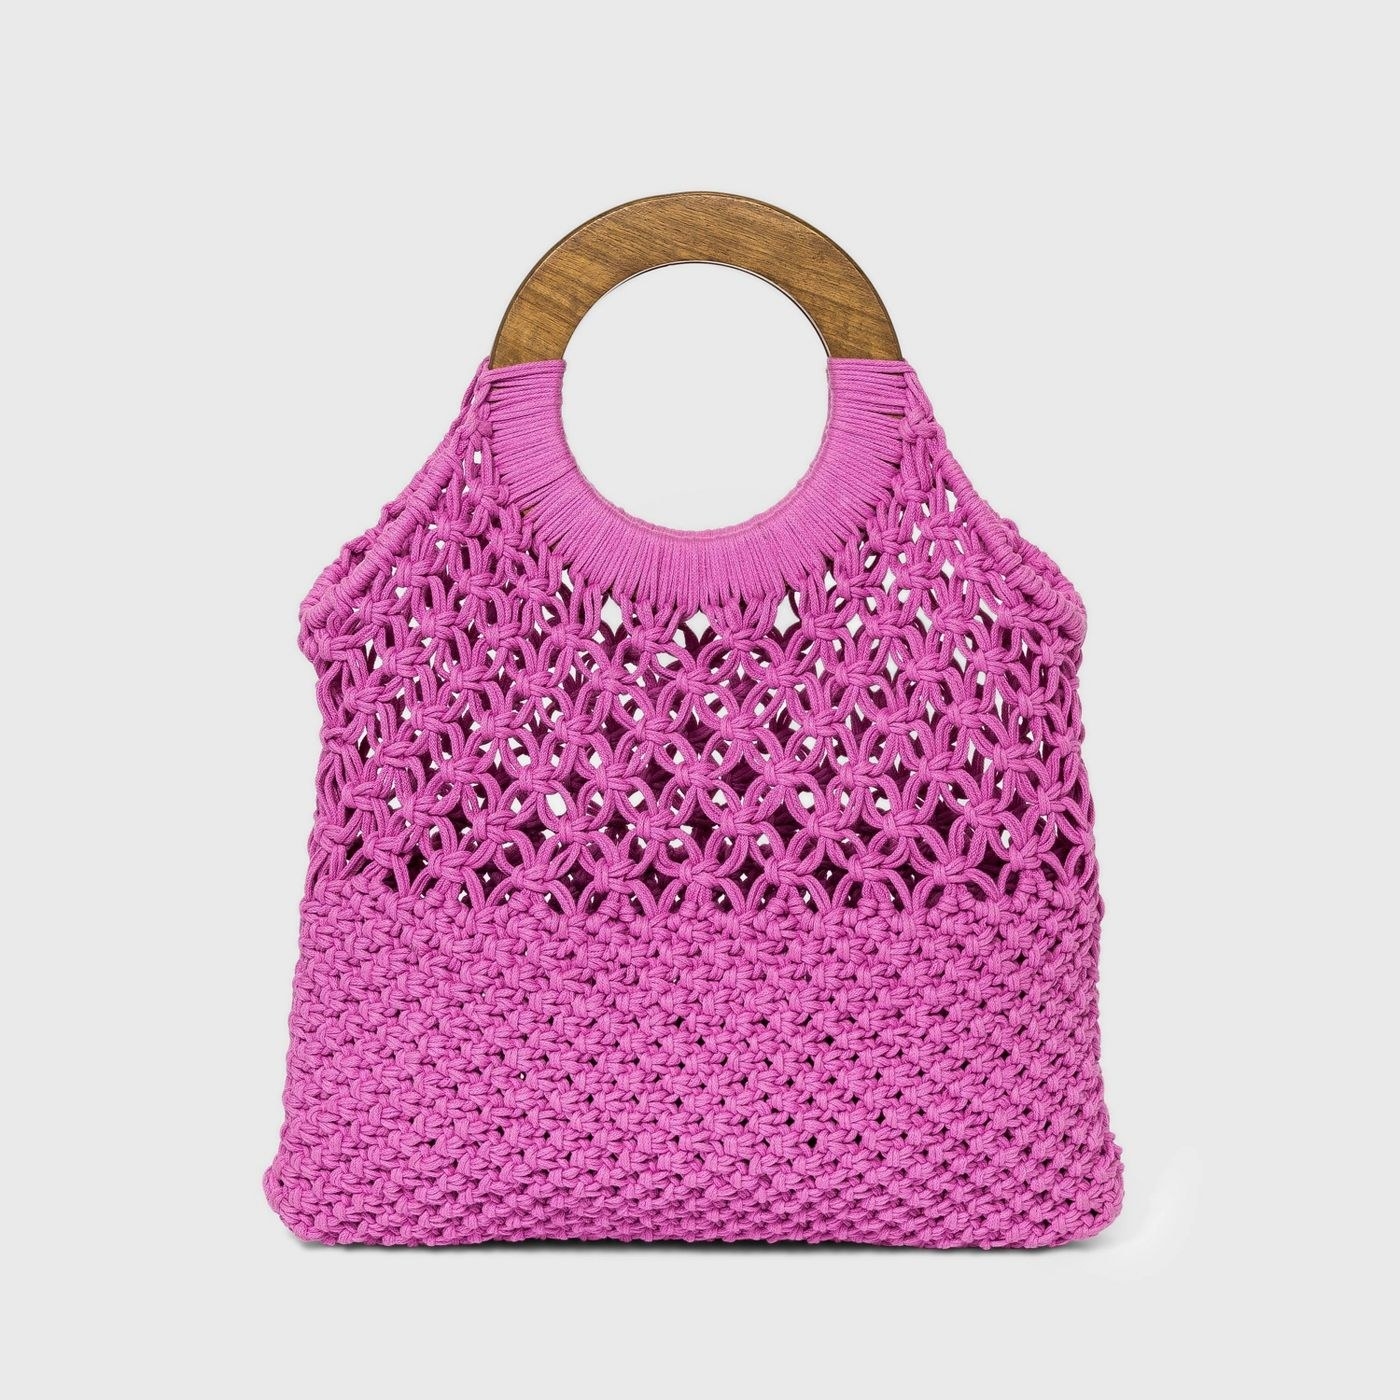 the pink straw bag